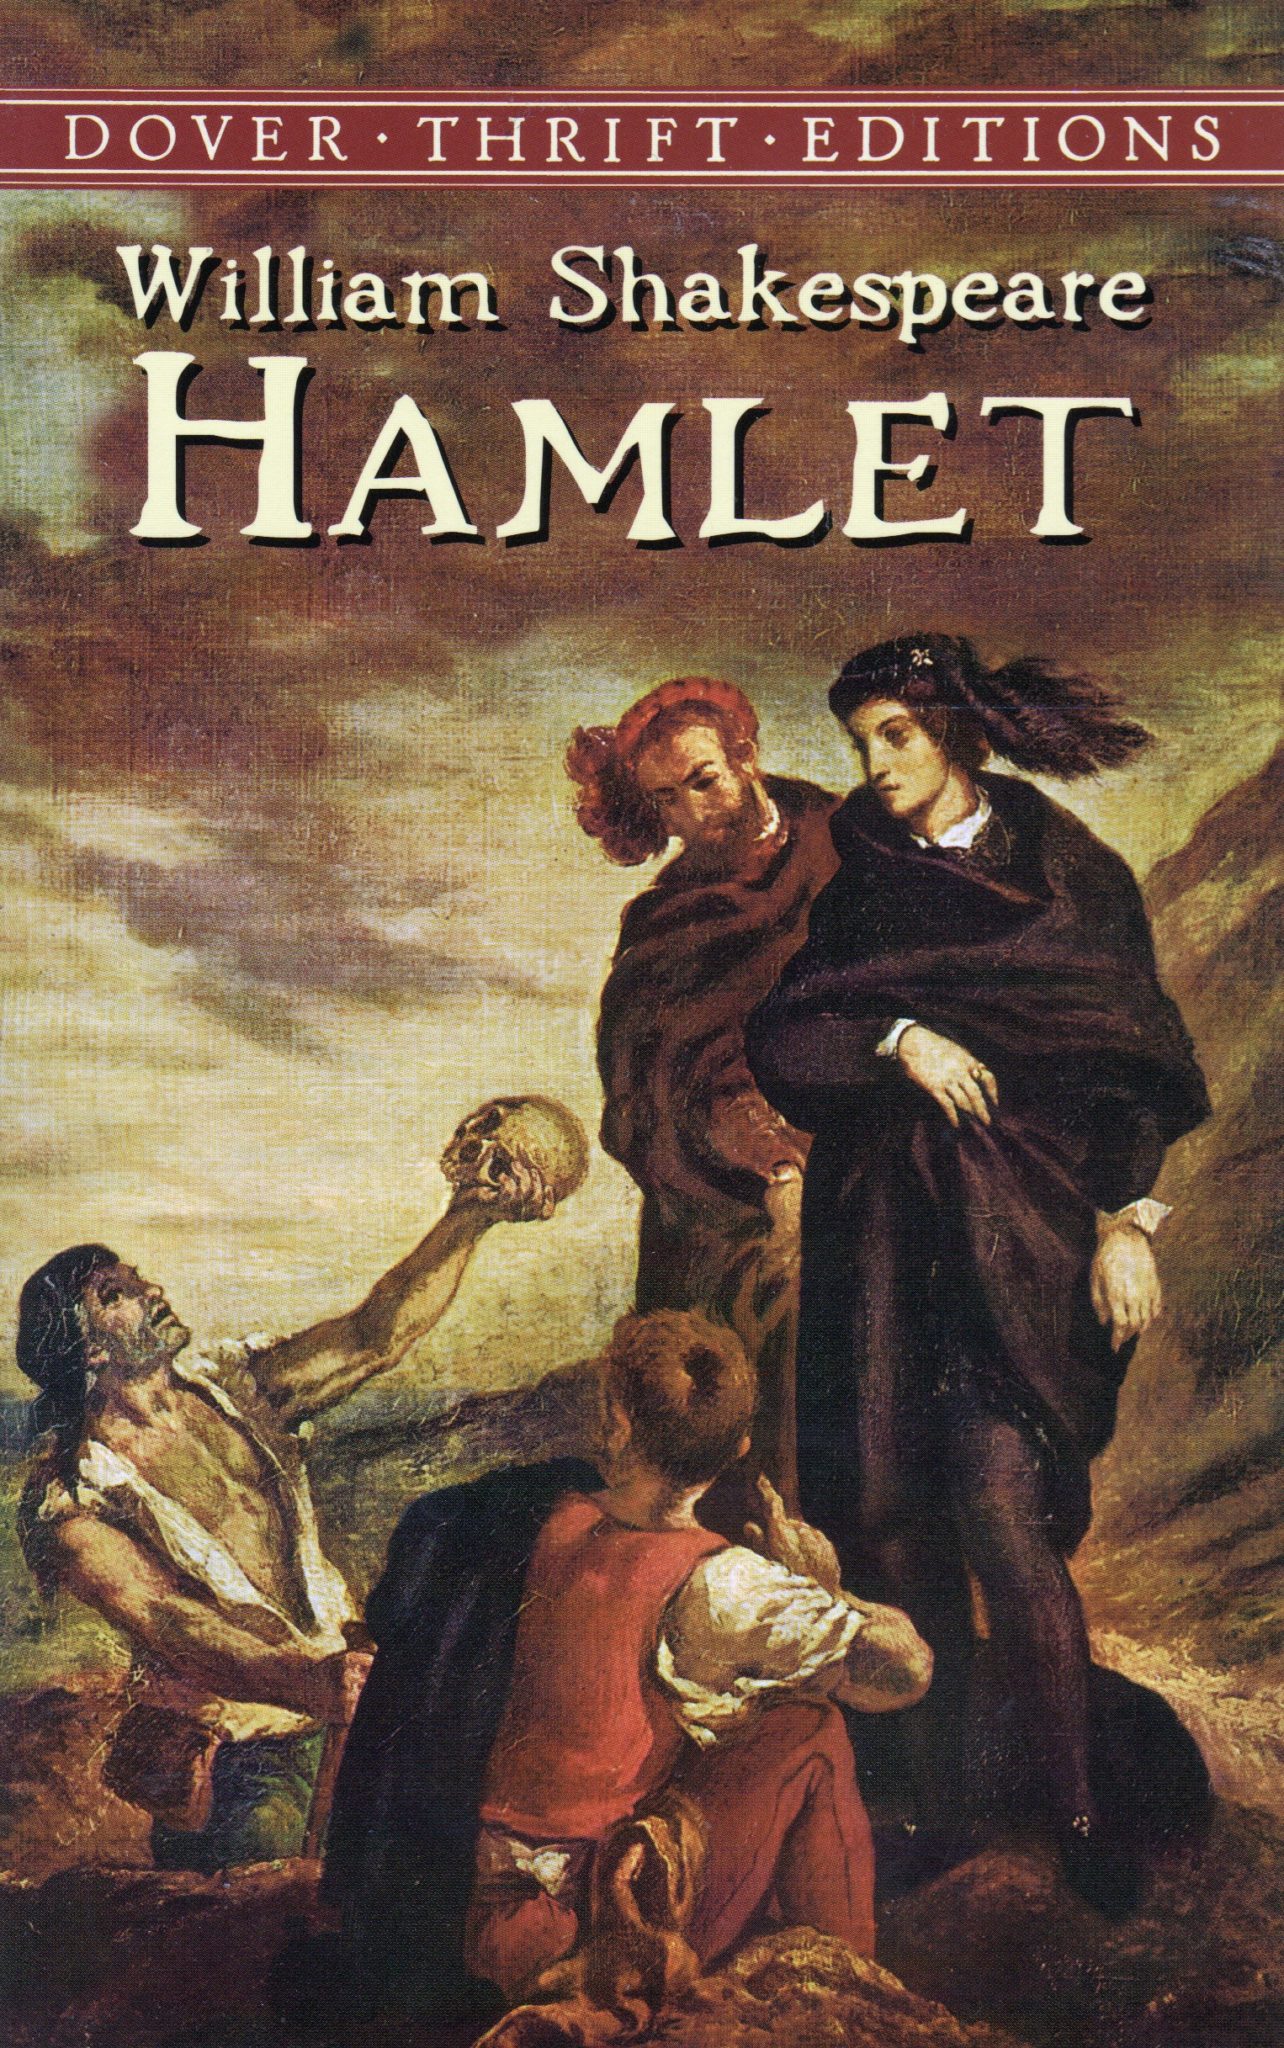 hamlet is a character of many contradictions essay